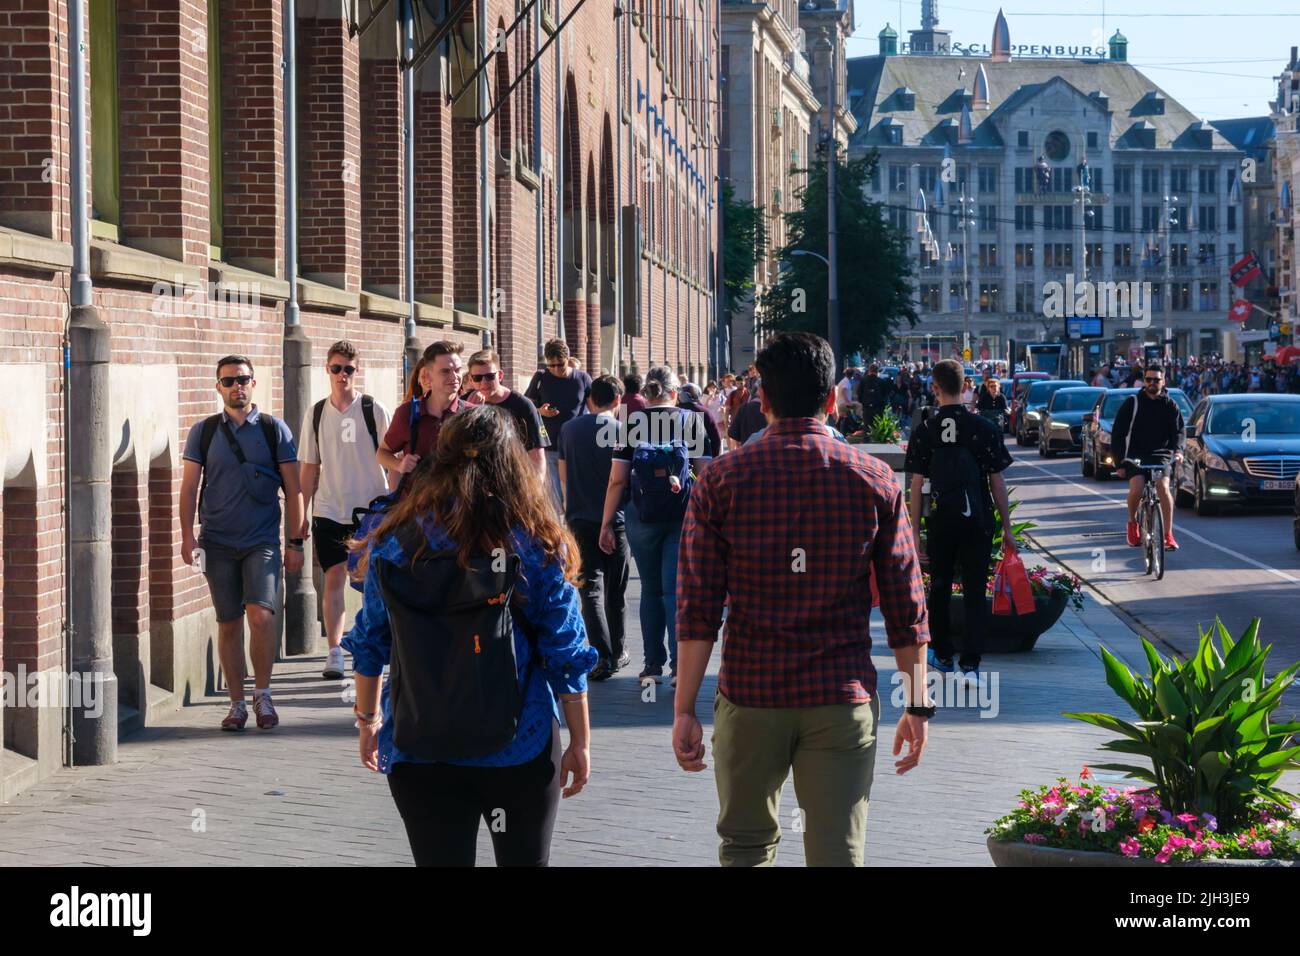 Amsterdam, The Netherlands - 22 June 2022: People walking on narrow street with many stores Stock Photo